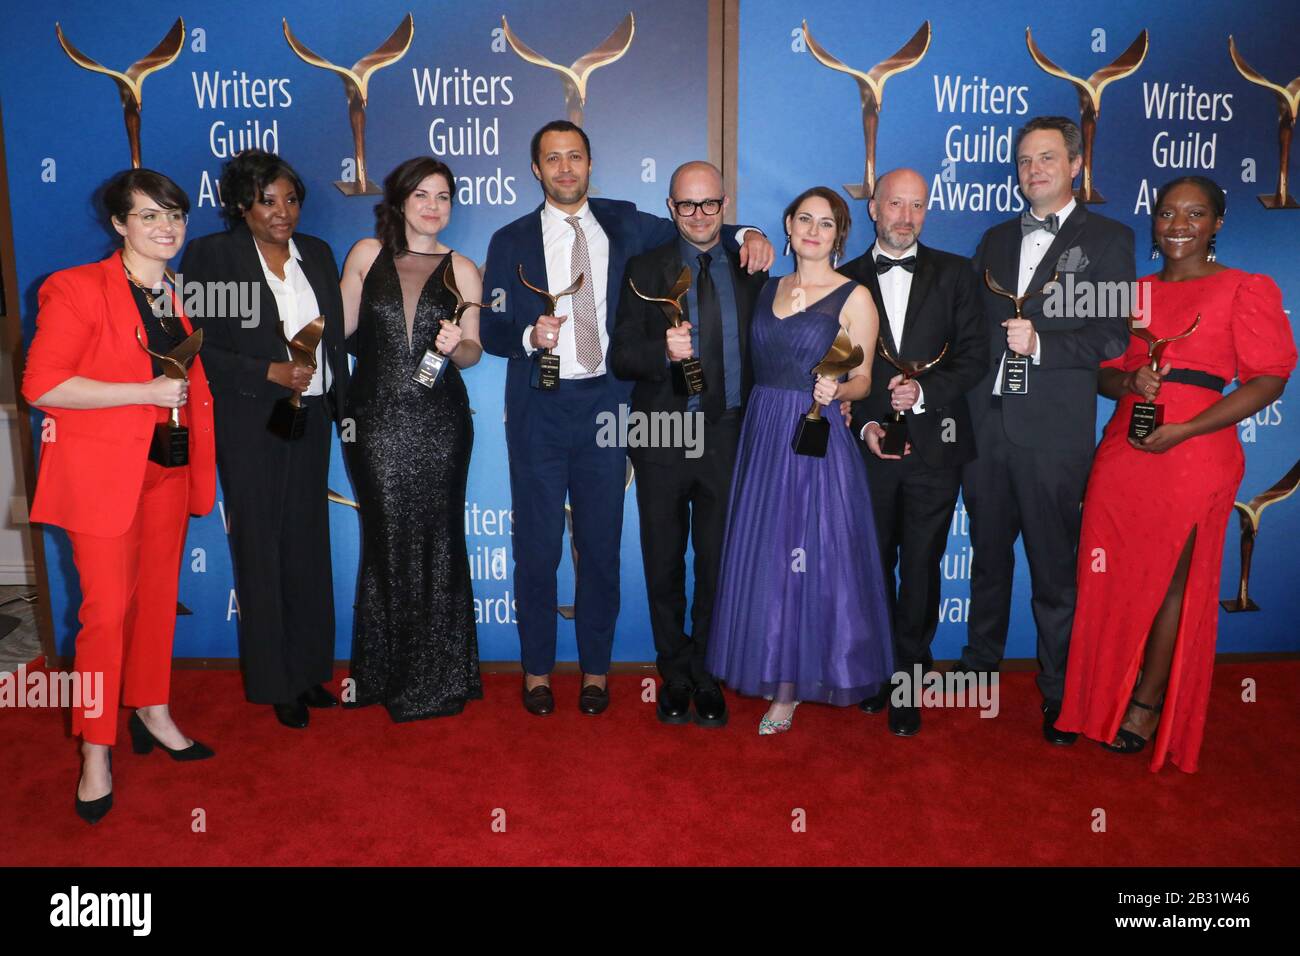 Writers Guild Awards 2020 - West Coast Ceremony Press Room at the Beverly Hilton Hotel in Beverly Hills, California on February 1, 2020 Featuring: Claire Kiechel, Carly Wray, Cord Jefferson, Damon Lindelof, Jeff Jensen, Stacy Osei-Kuffour Where: Beverly Hills, California, United States When: 01 Feb 2020 Credit: Sheri Determan/WENN.com Stock Photo